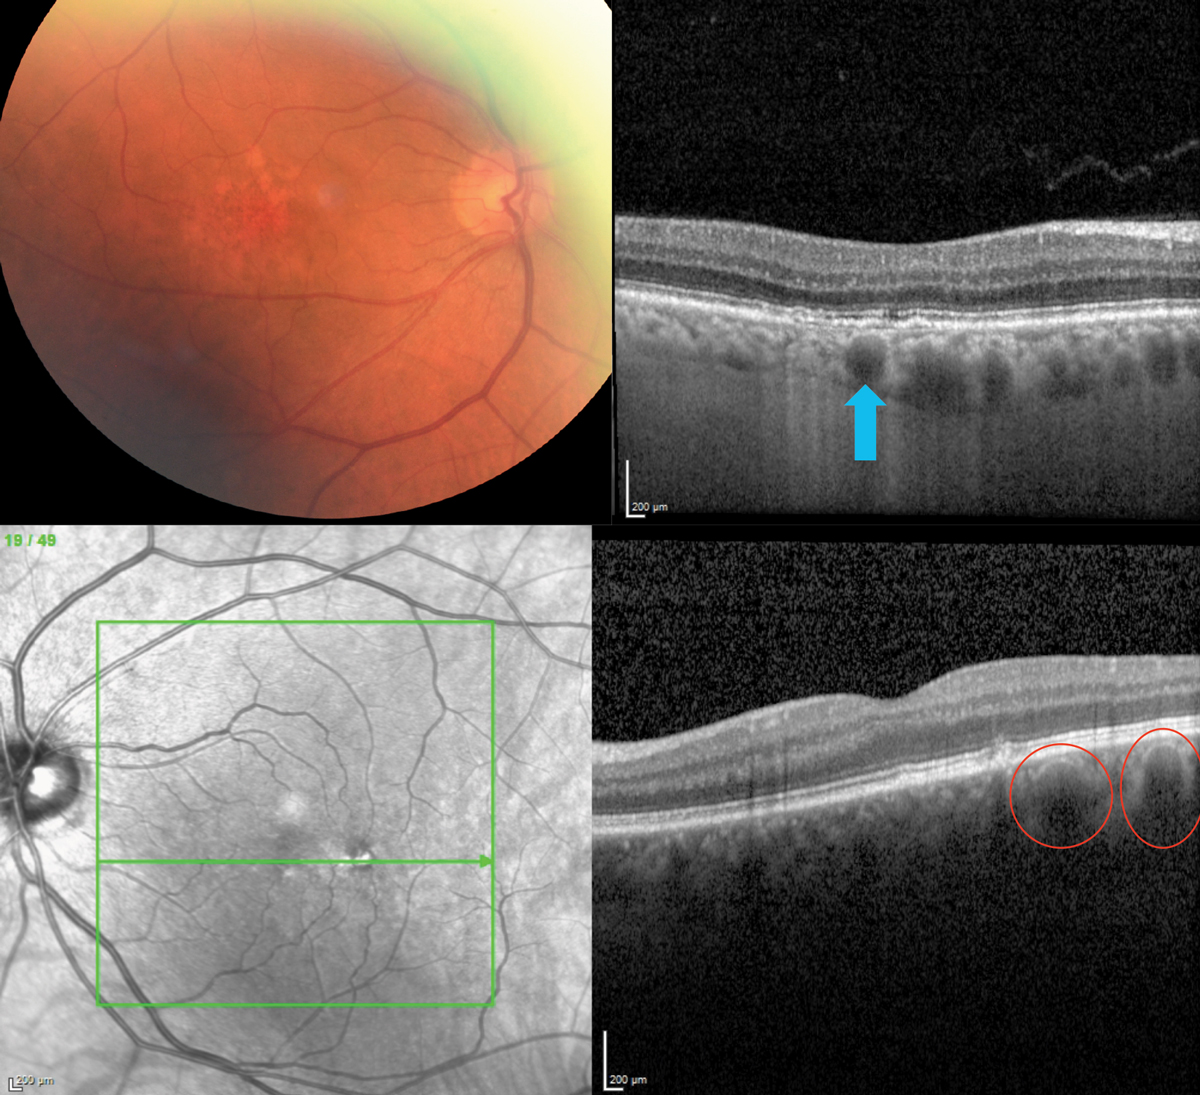 Fig. 6. A well-delineated pachyvessel (top; blue arrow) and several adjacent ones in a patient with RPE disruption mimicking AMD (bottom), a 72-year-old Caucasian on AREDS2 for AMD. Note the thickened choroid (which should be thinner in AMD) and two pachyvessels (red circles), one of which is just below the RPE disruption.